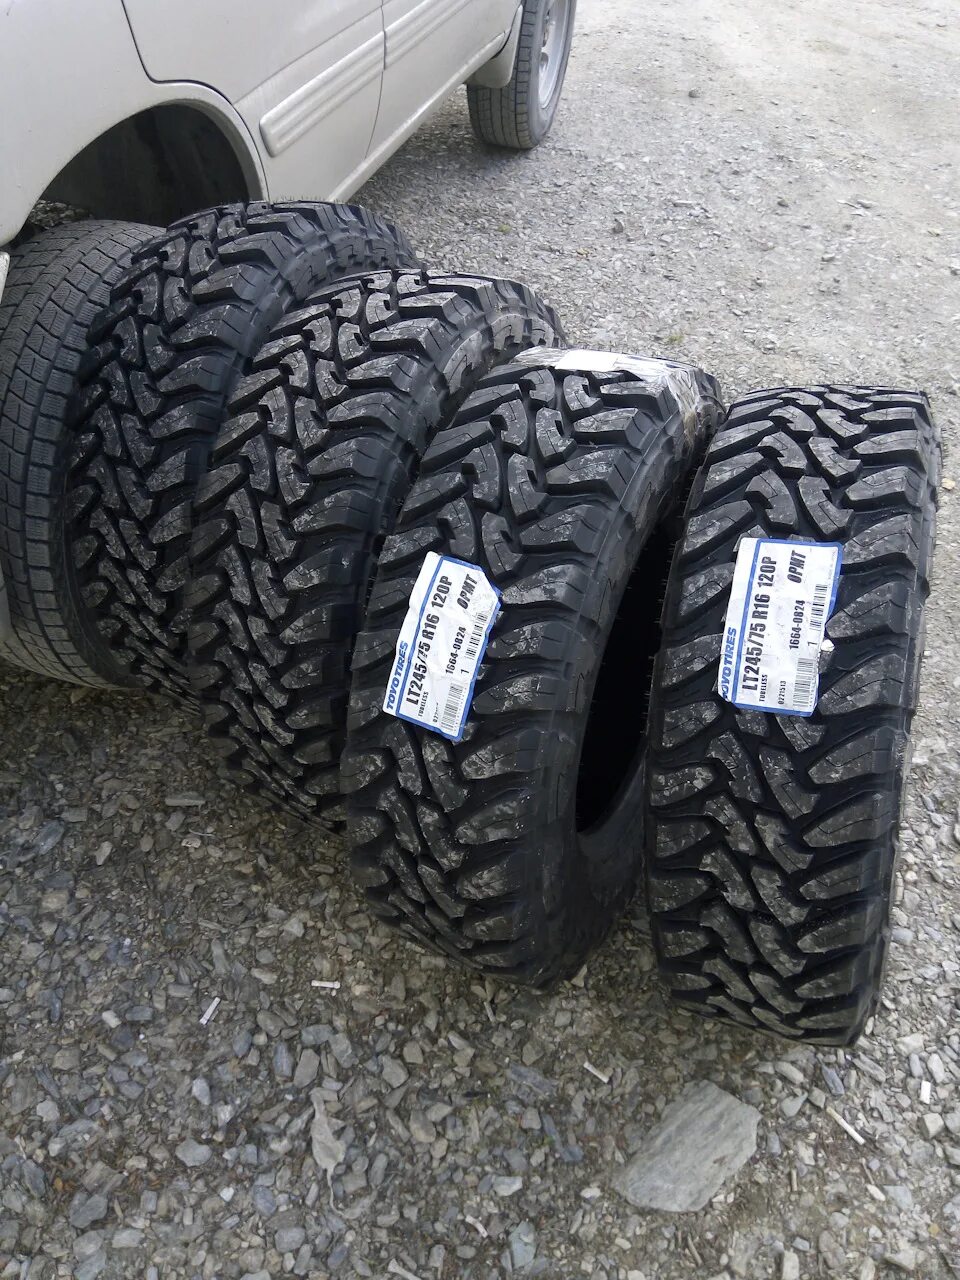 265/75 R16 МТ Toyo. Toyo MT 245/75 r16. Тойо опен Кантри МТ 225/75 r16. Toyo open Country m/t. Toyo open country m